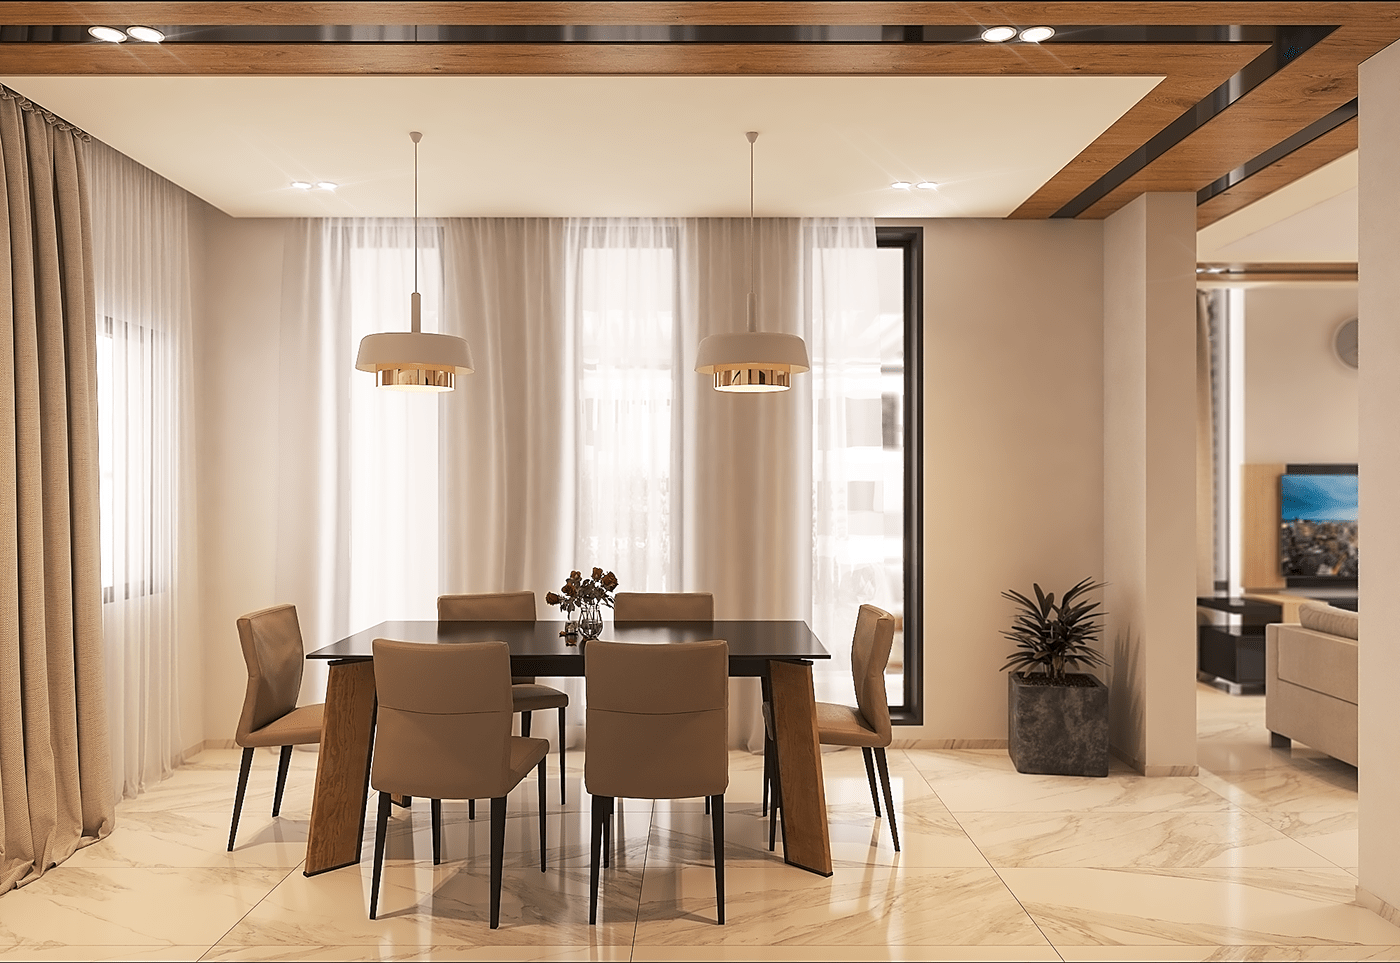 Interior Render of Dining Area
Produced in 3ds Max and V-Ray.